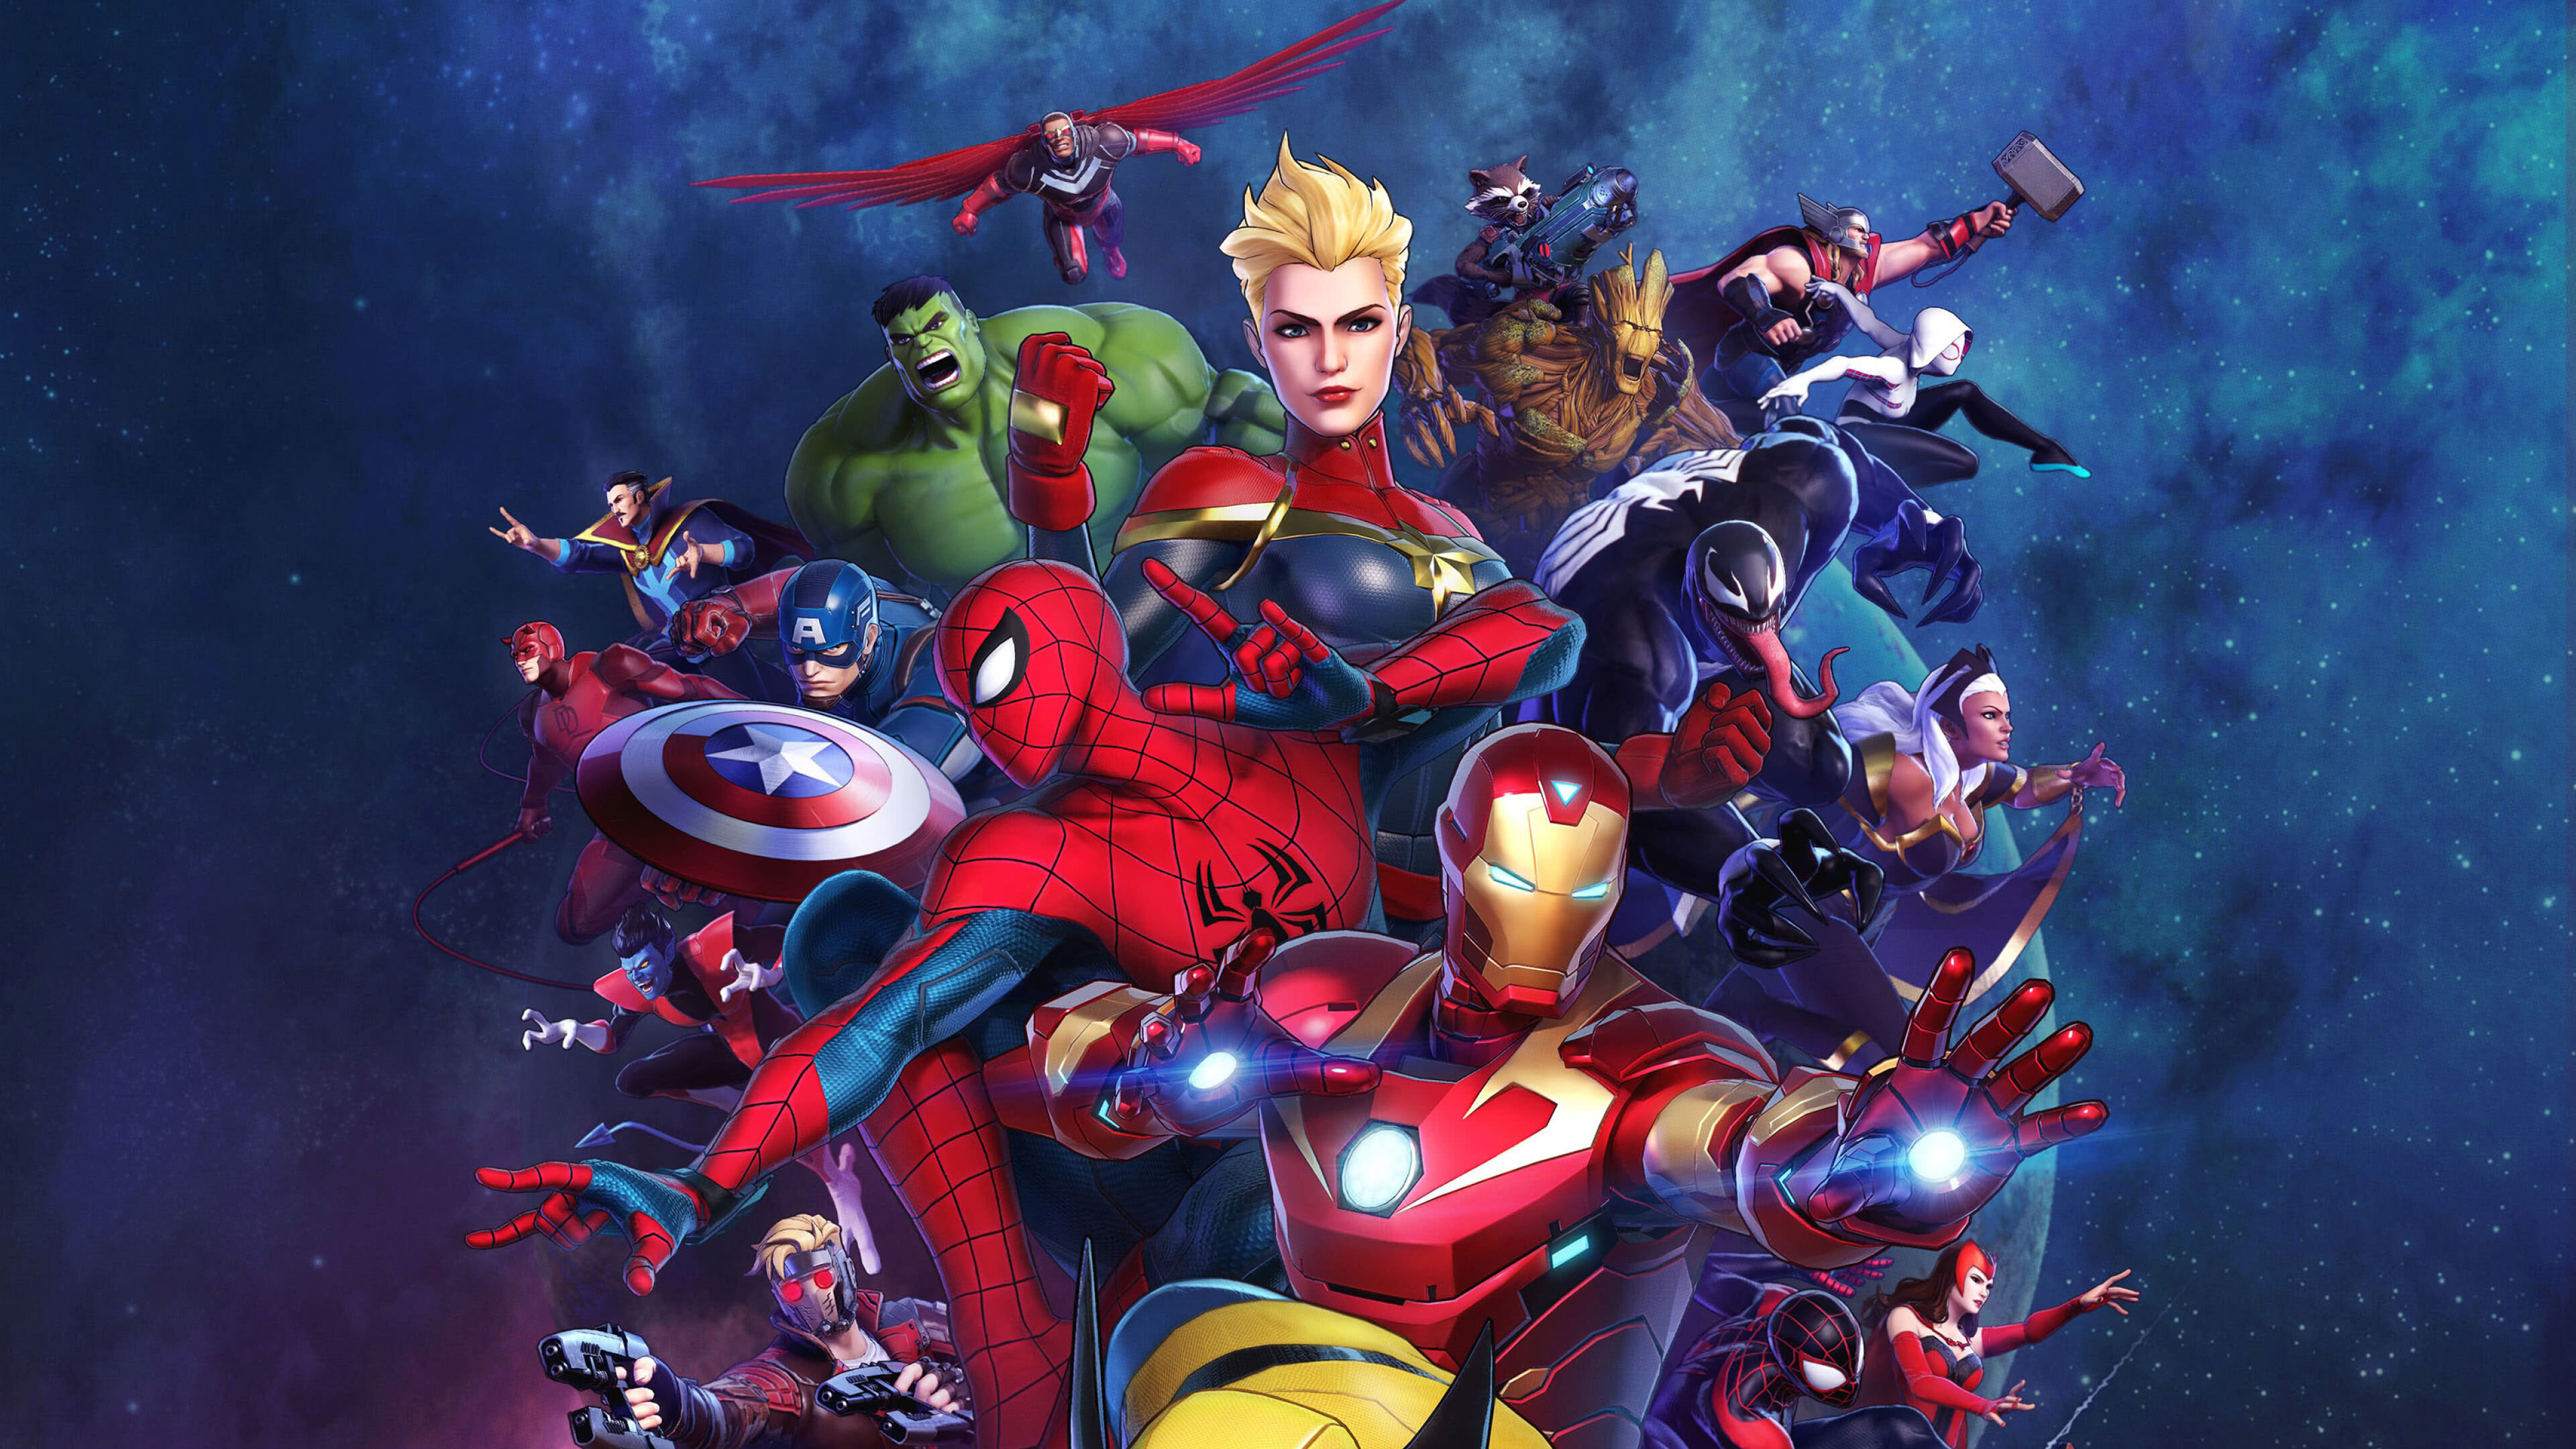 Marvel Heroes: Ultimate Alliance 3, Characters, Spider-Man. 3840x2160 4K Wallpaper.